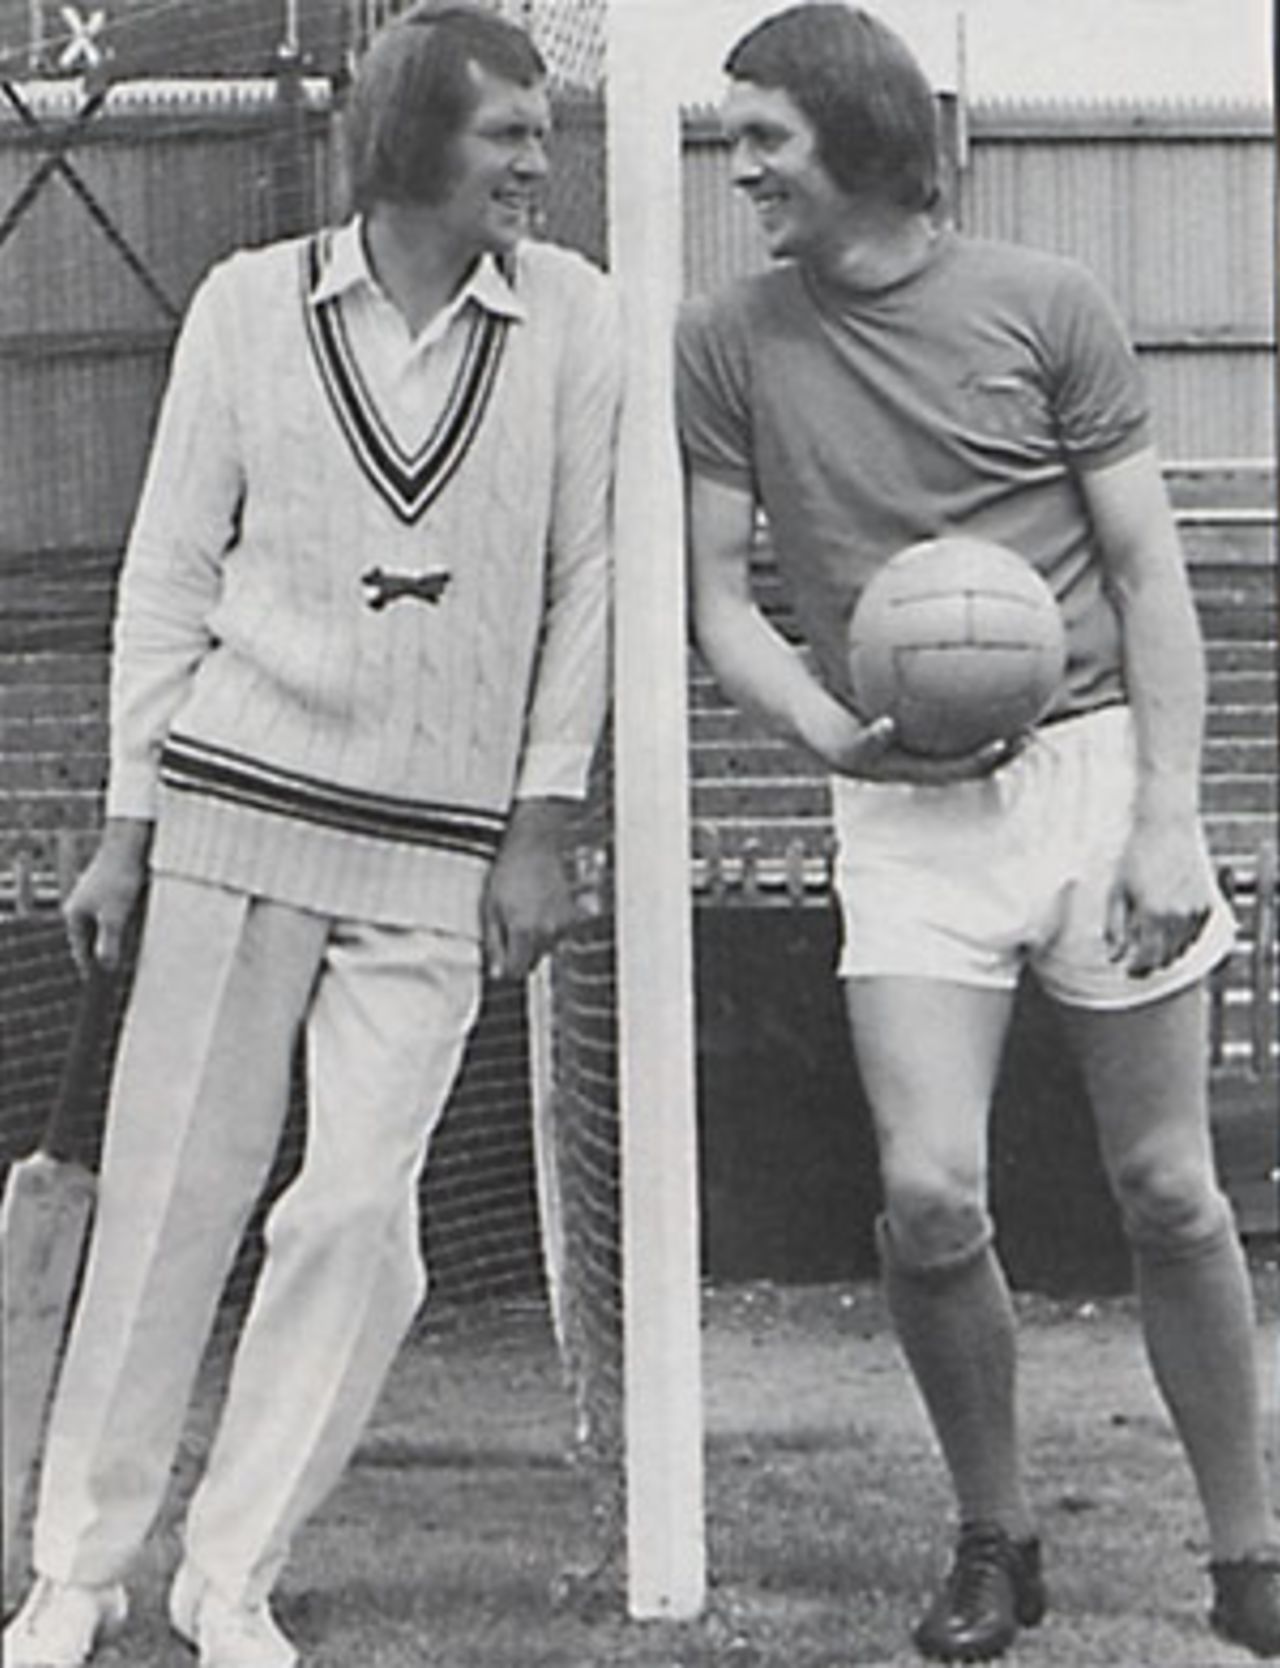 Chris Balderstone - Leicestershire cricketer and Doncaster footballer on the same day, September 1975